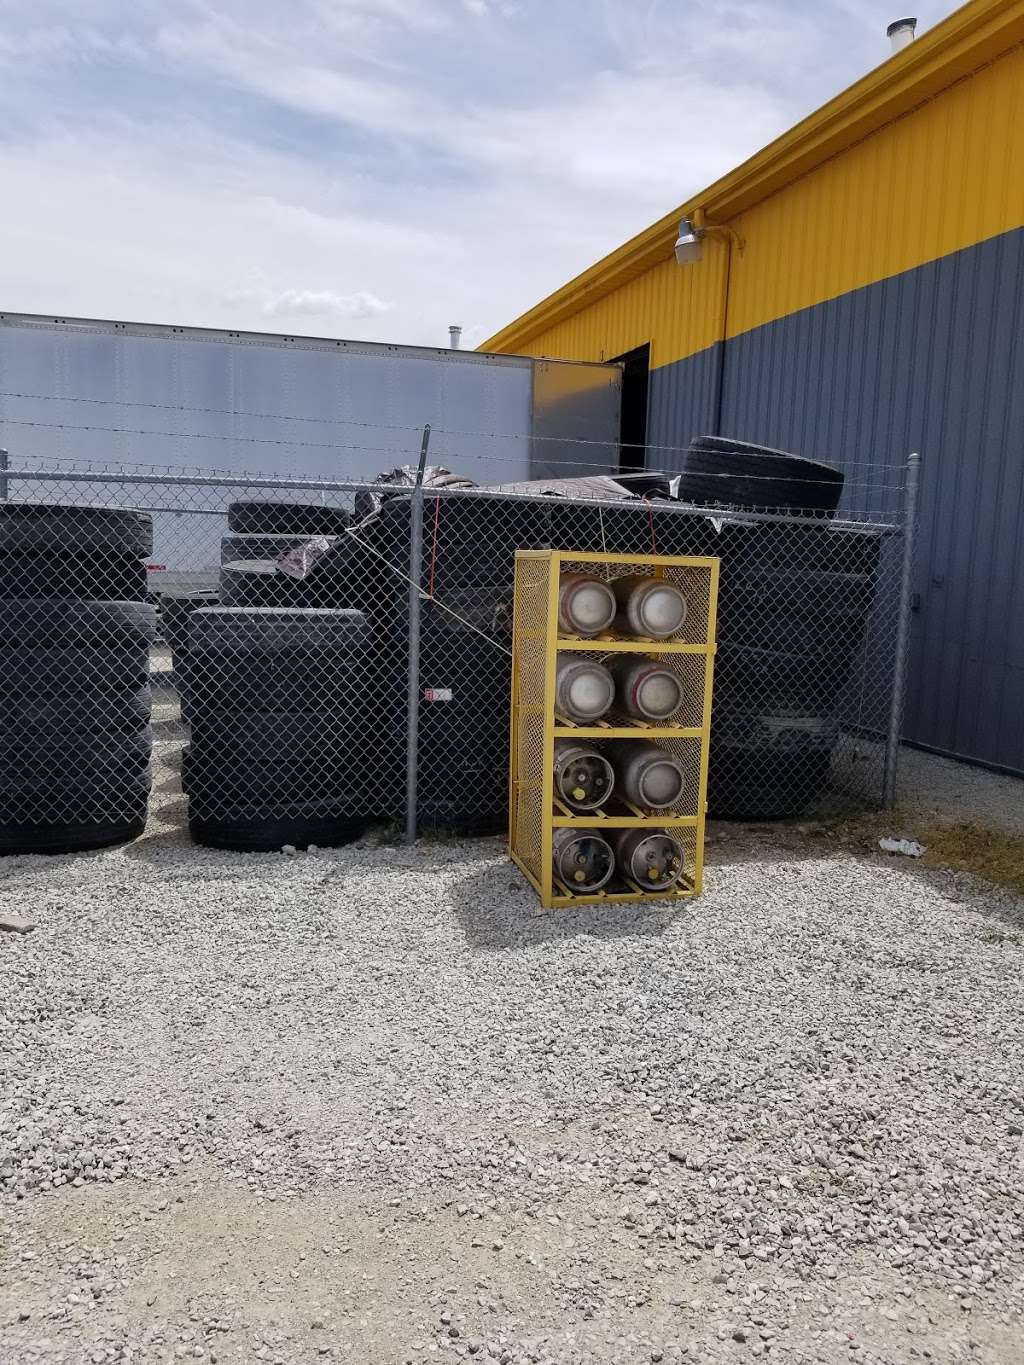 BestDrive Commercial Tire Center | Best Drive Tire, 4805 W. 96th St, Indianapolis, IN 46268 | Phone: (317) 829-5719